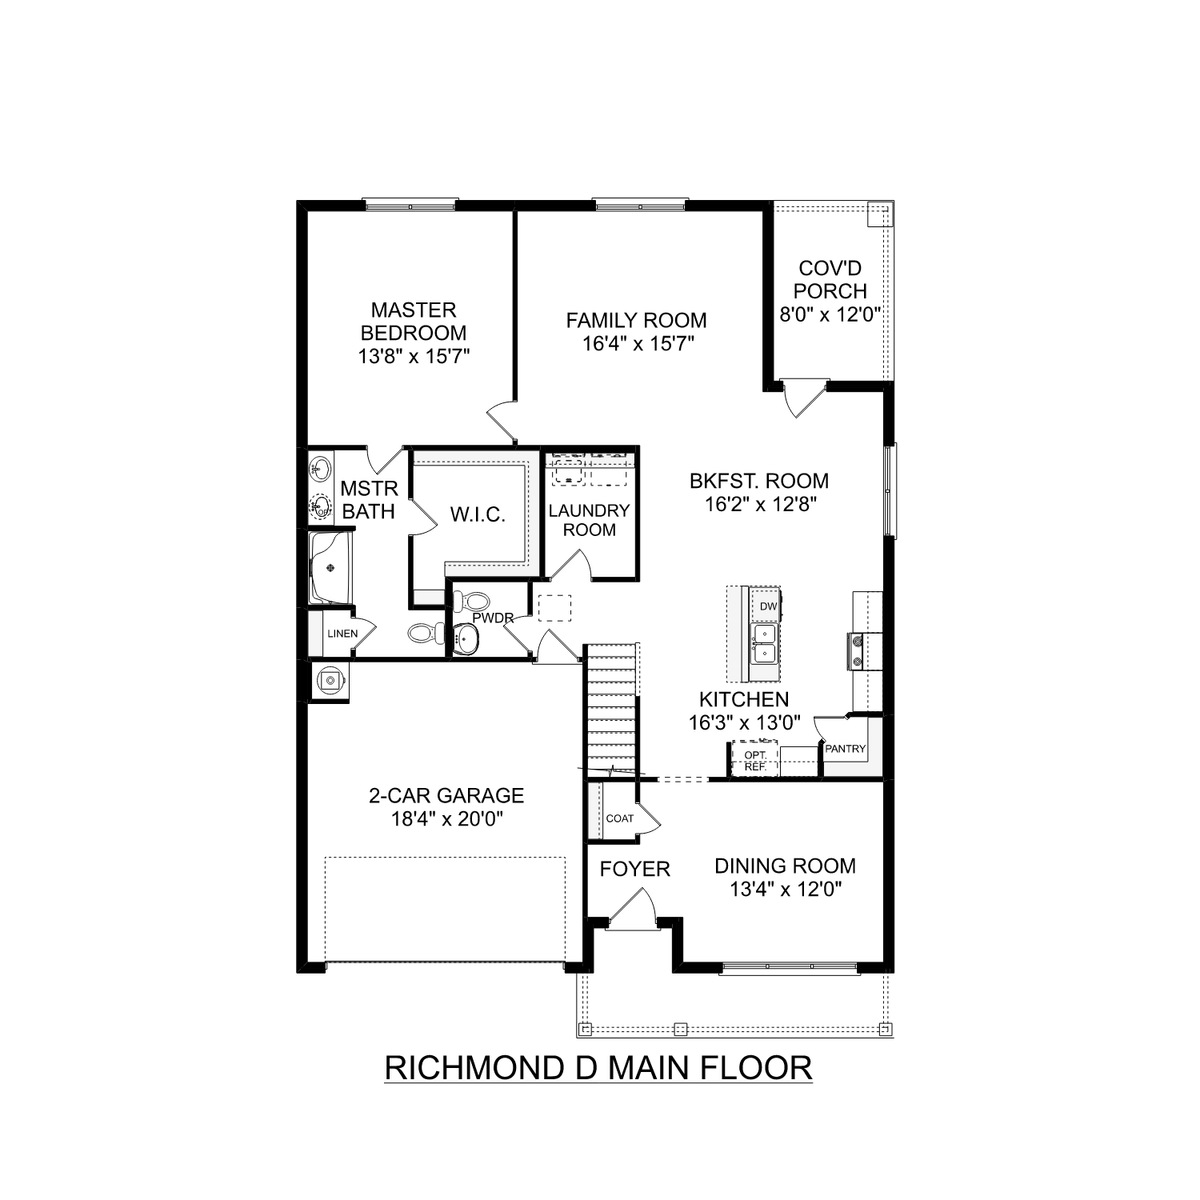 1 - The Richmond D buildable floor plan layout in Davidson Homes' Little Burwell Estates community.